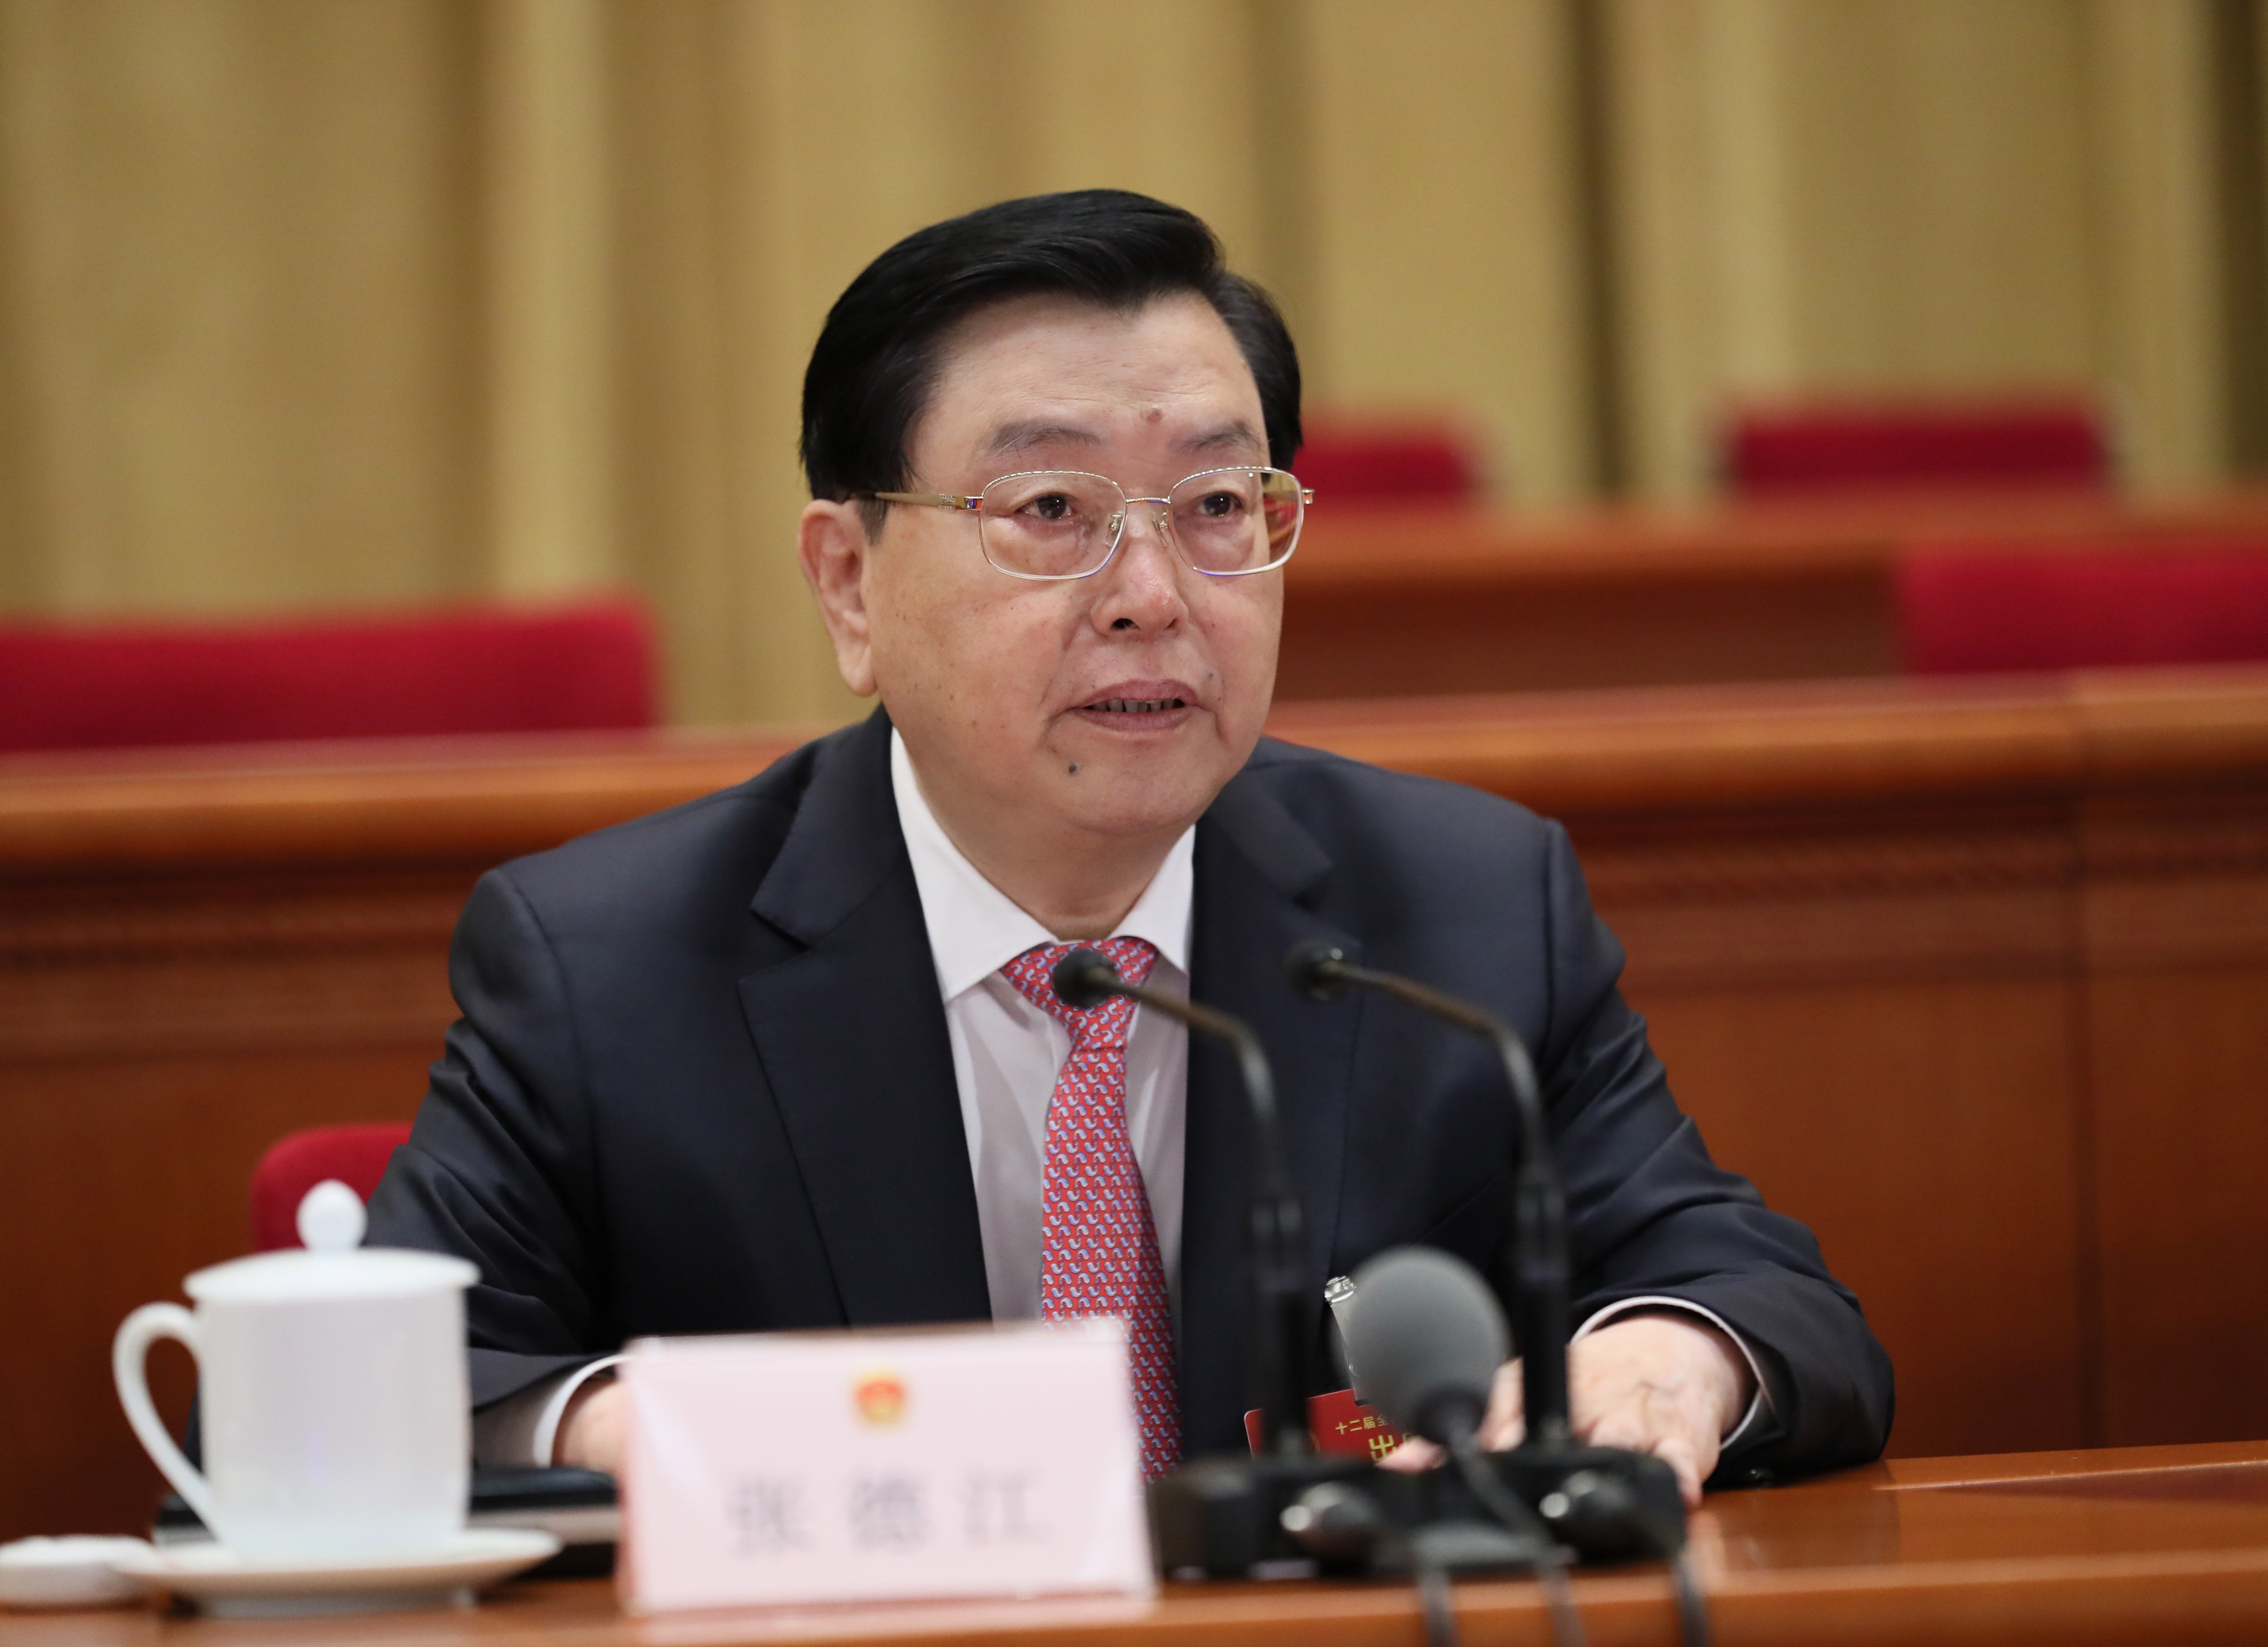 Zhang Dejiang called on the Hong Kong government to ‘steadfastly implement the constitutional obligation of national security’. Photo: Xinhua